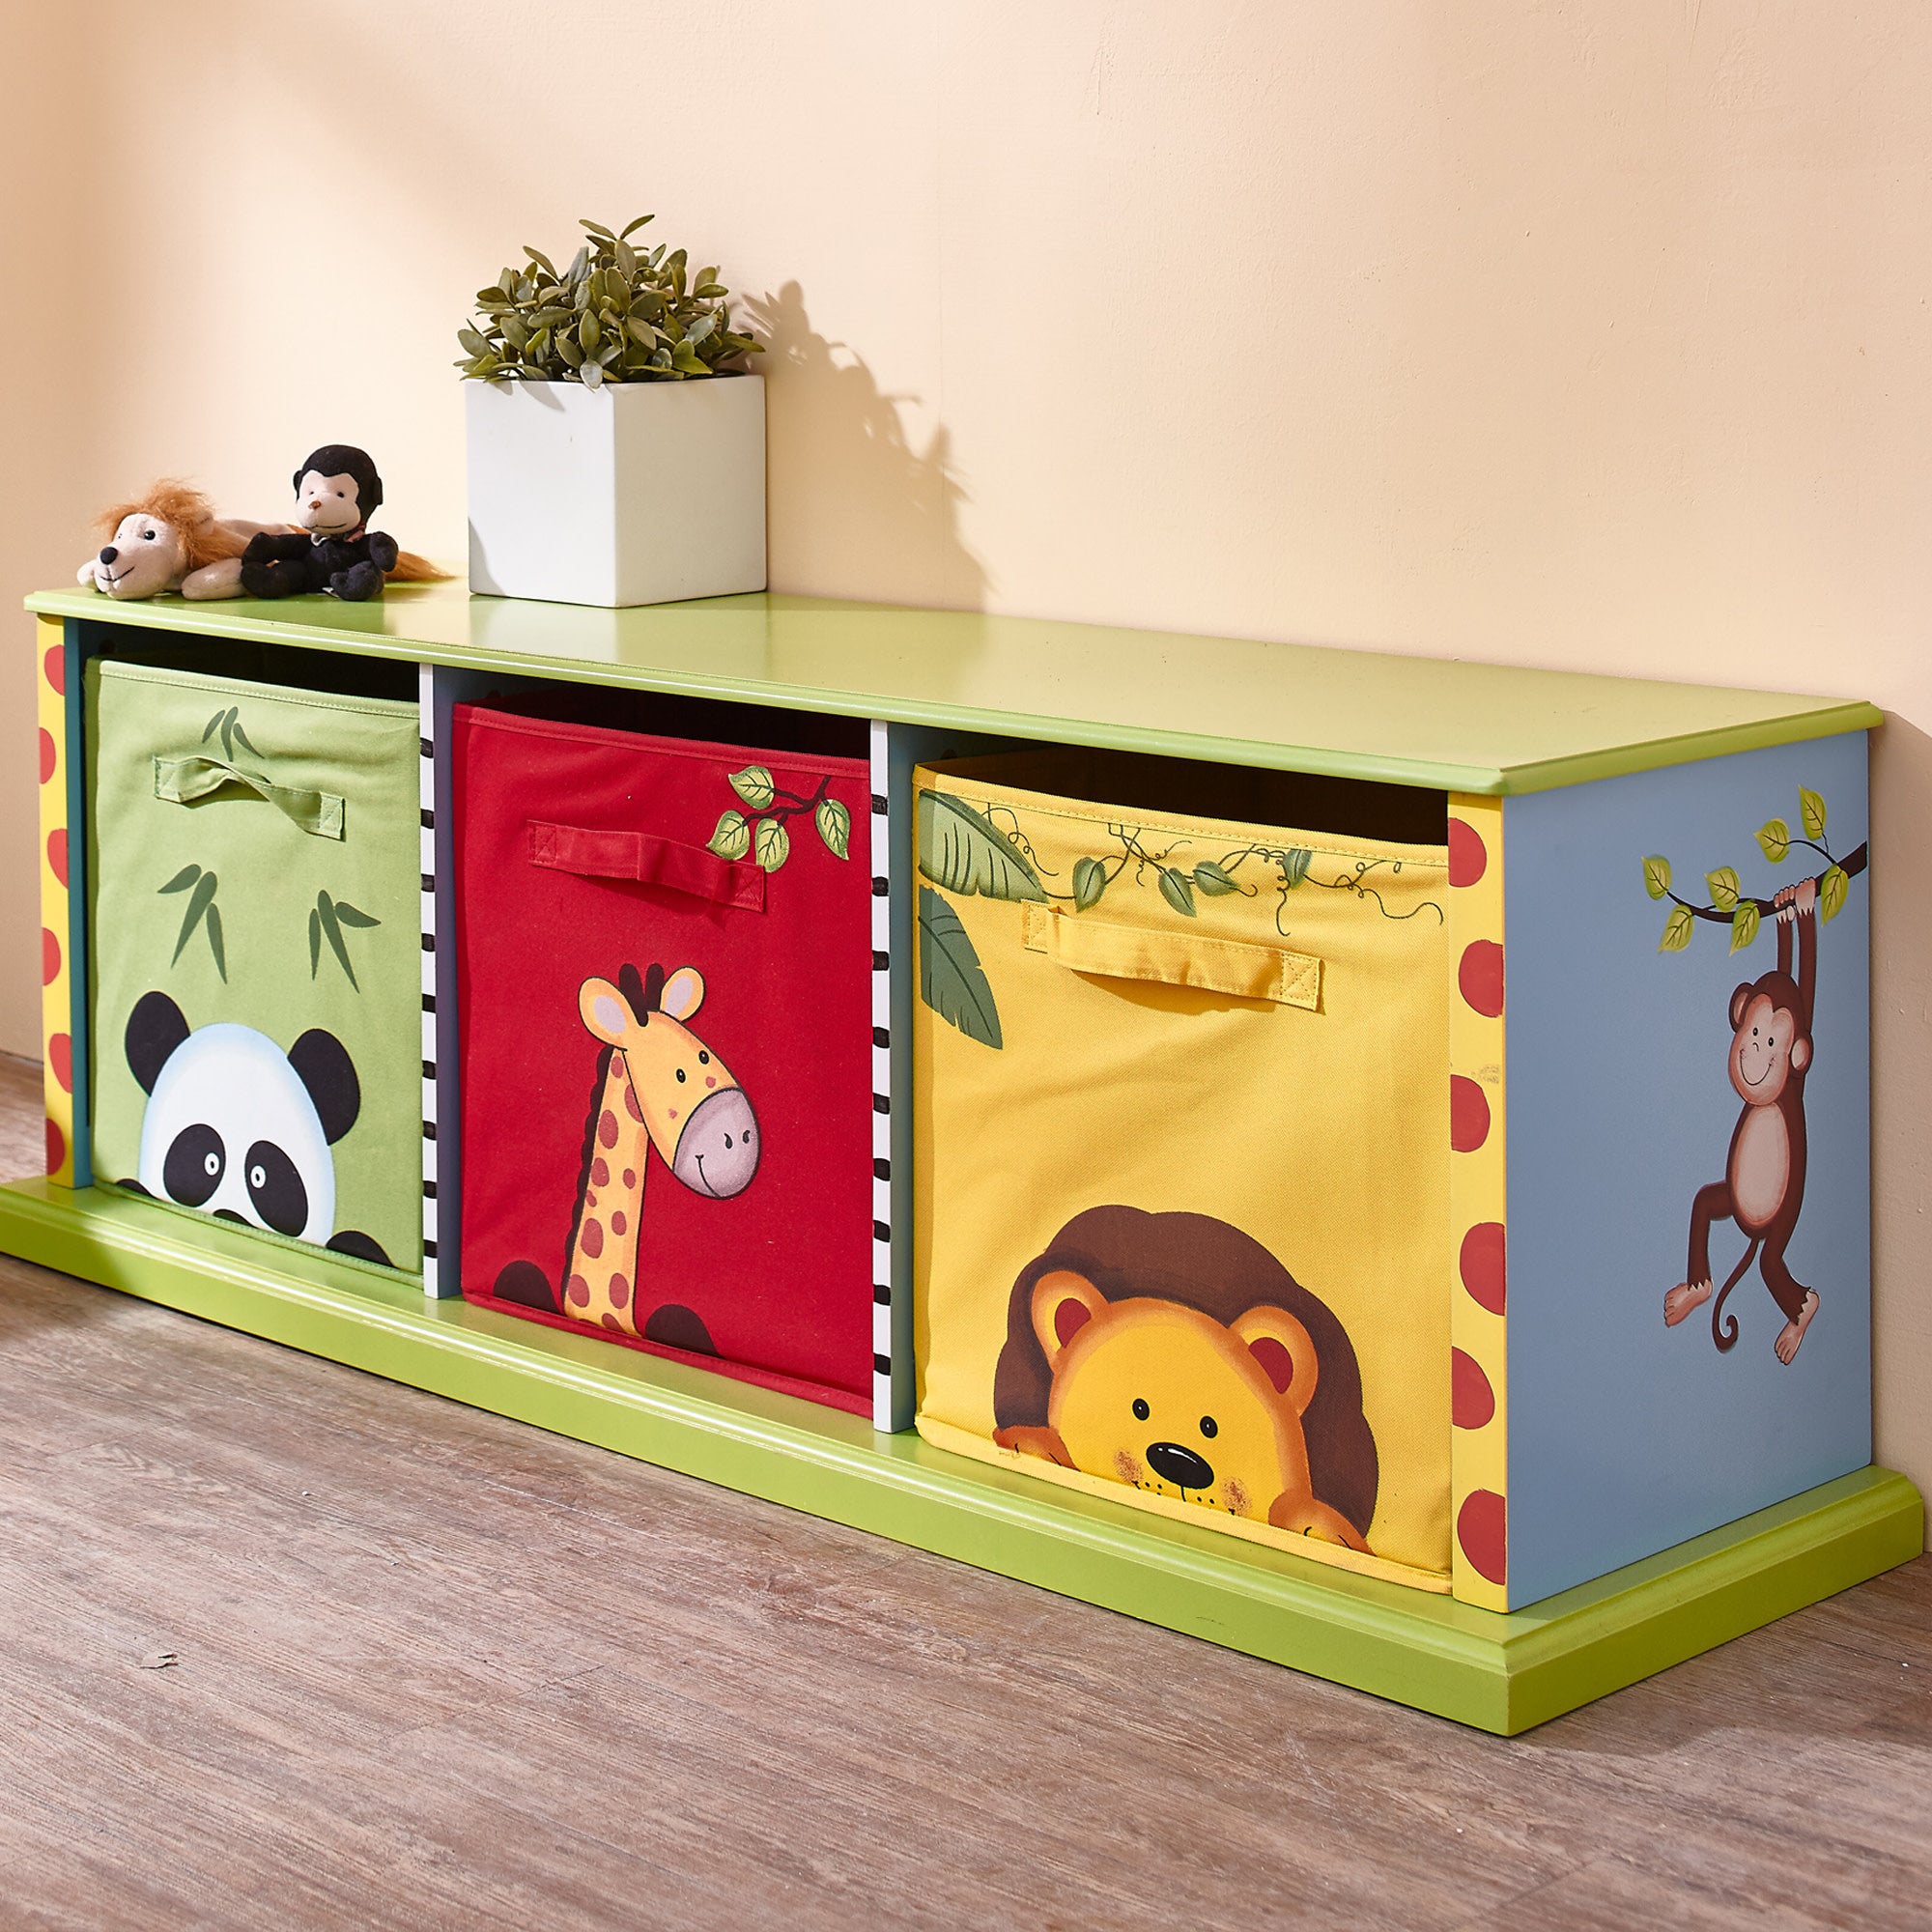 Fantasy Fields Sunny Safari Kids Wooden Painted Storage Cubby Bench with Fabric Bins, Multicolor